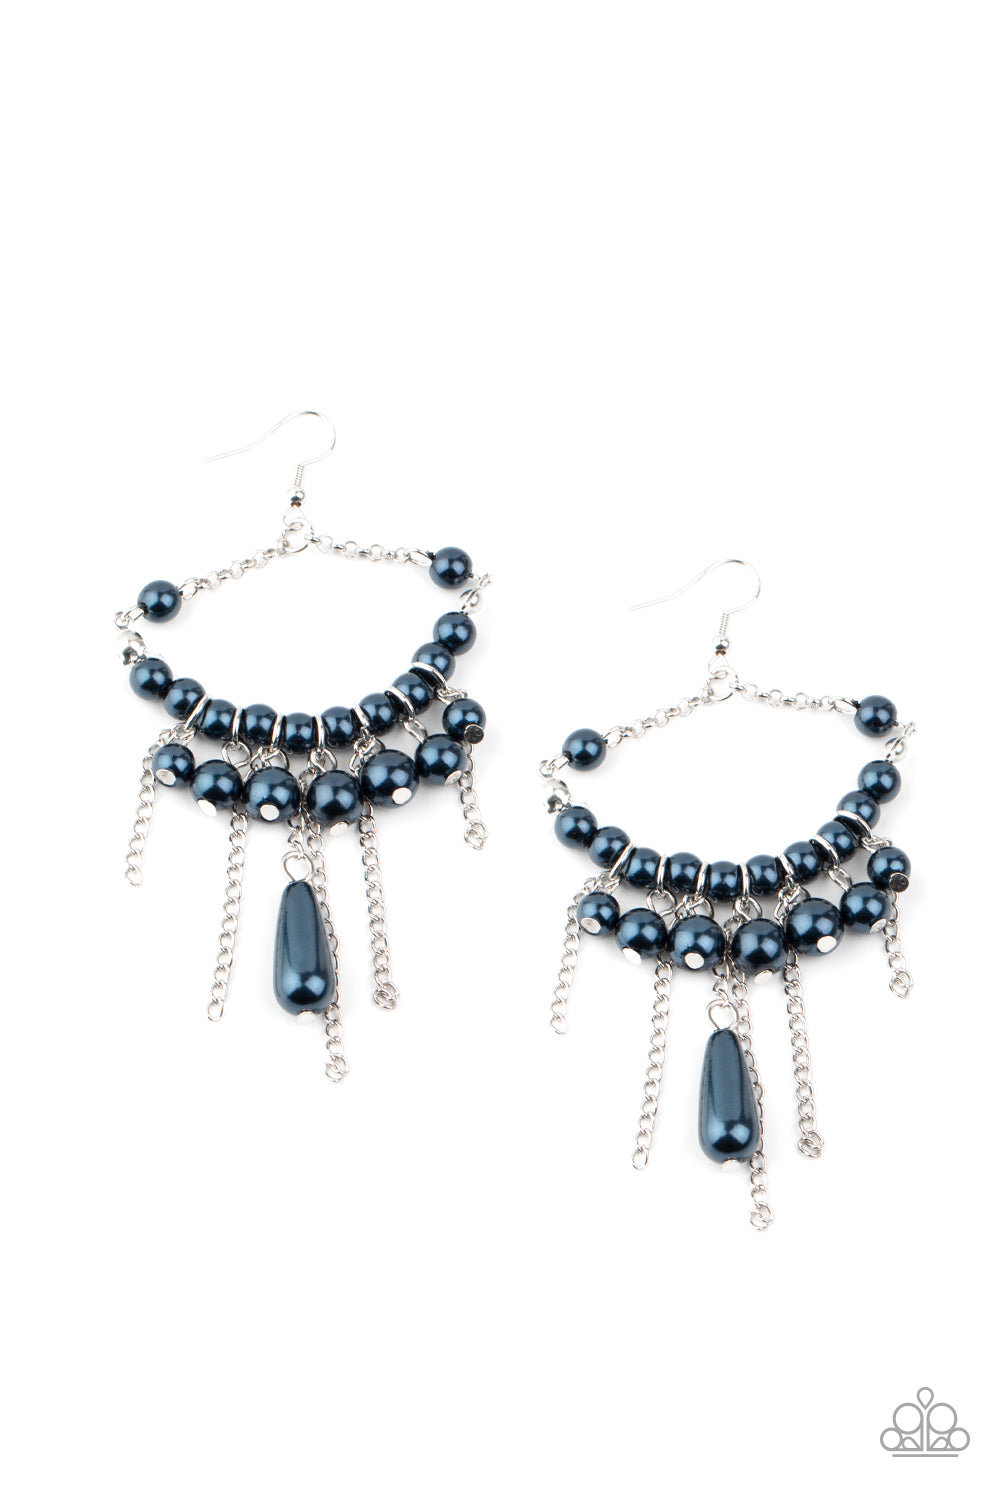 Paparazzi Accessories Party Planner Posh - Blue Earrings  - Lady T Accessories